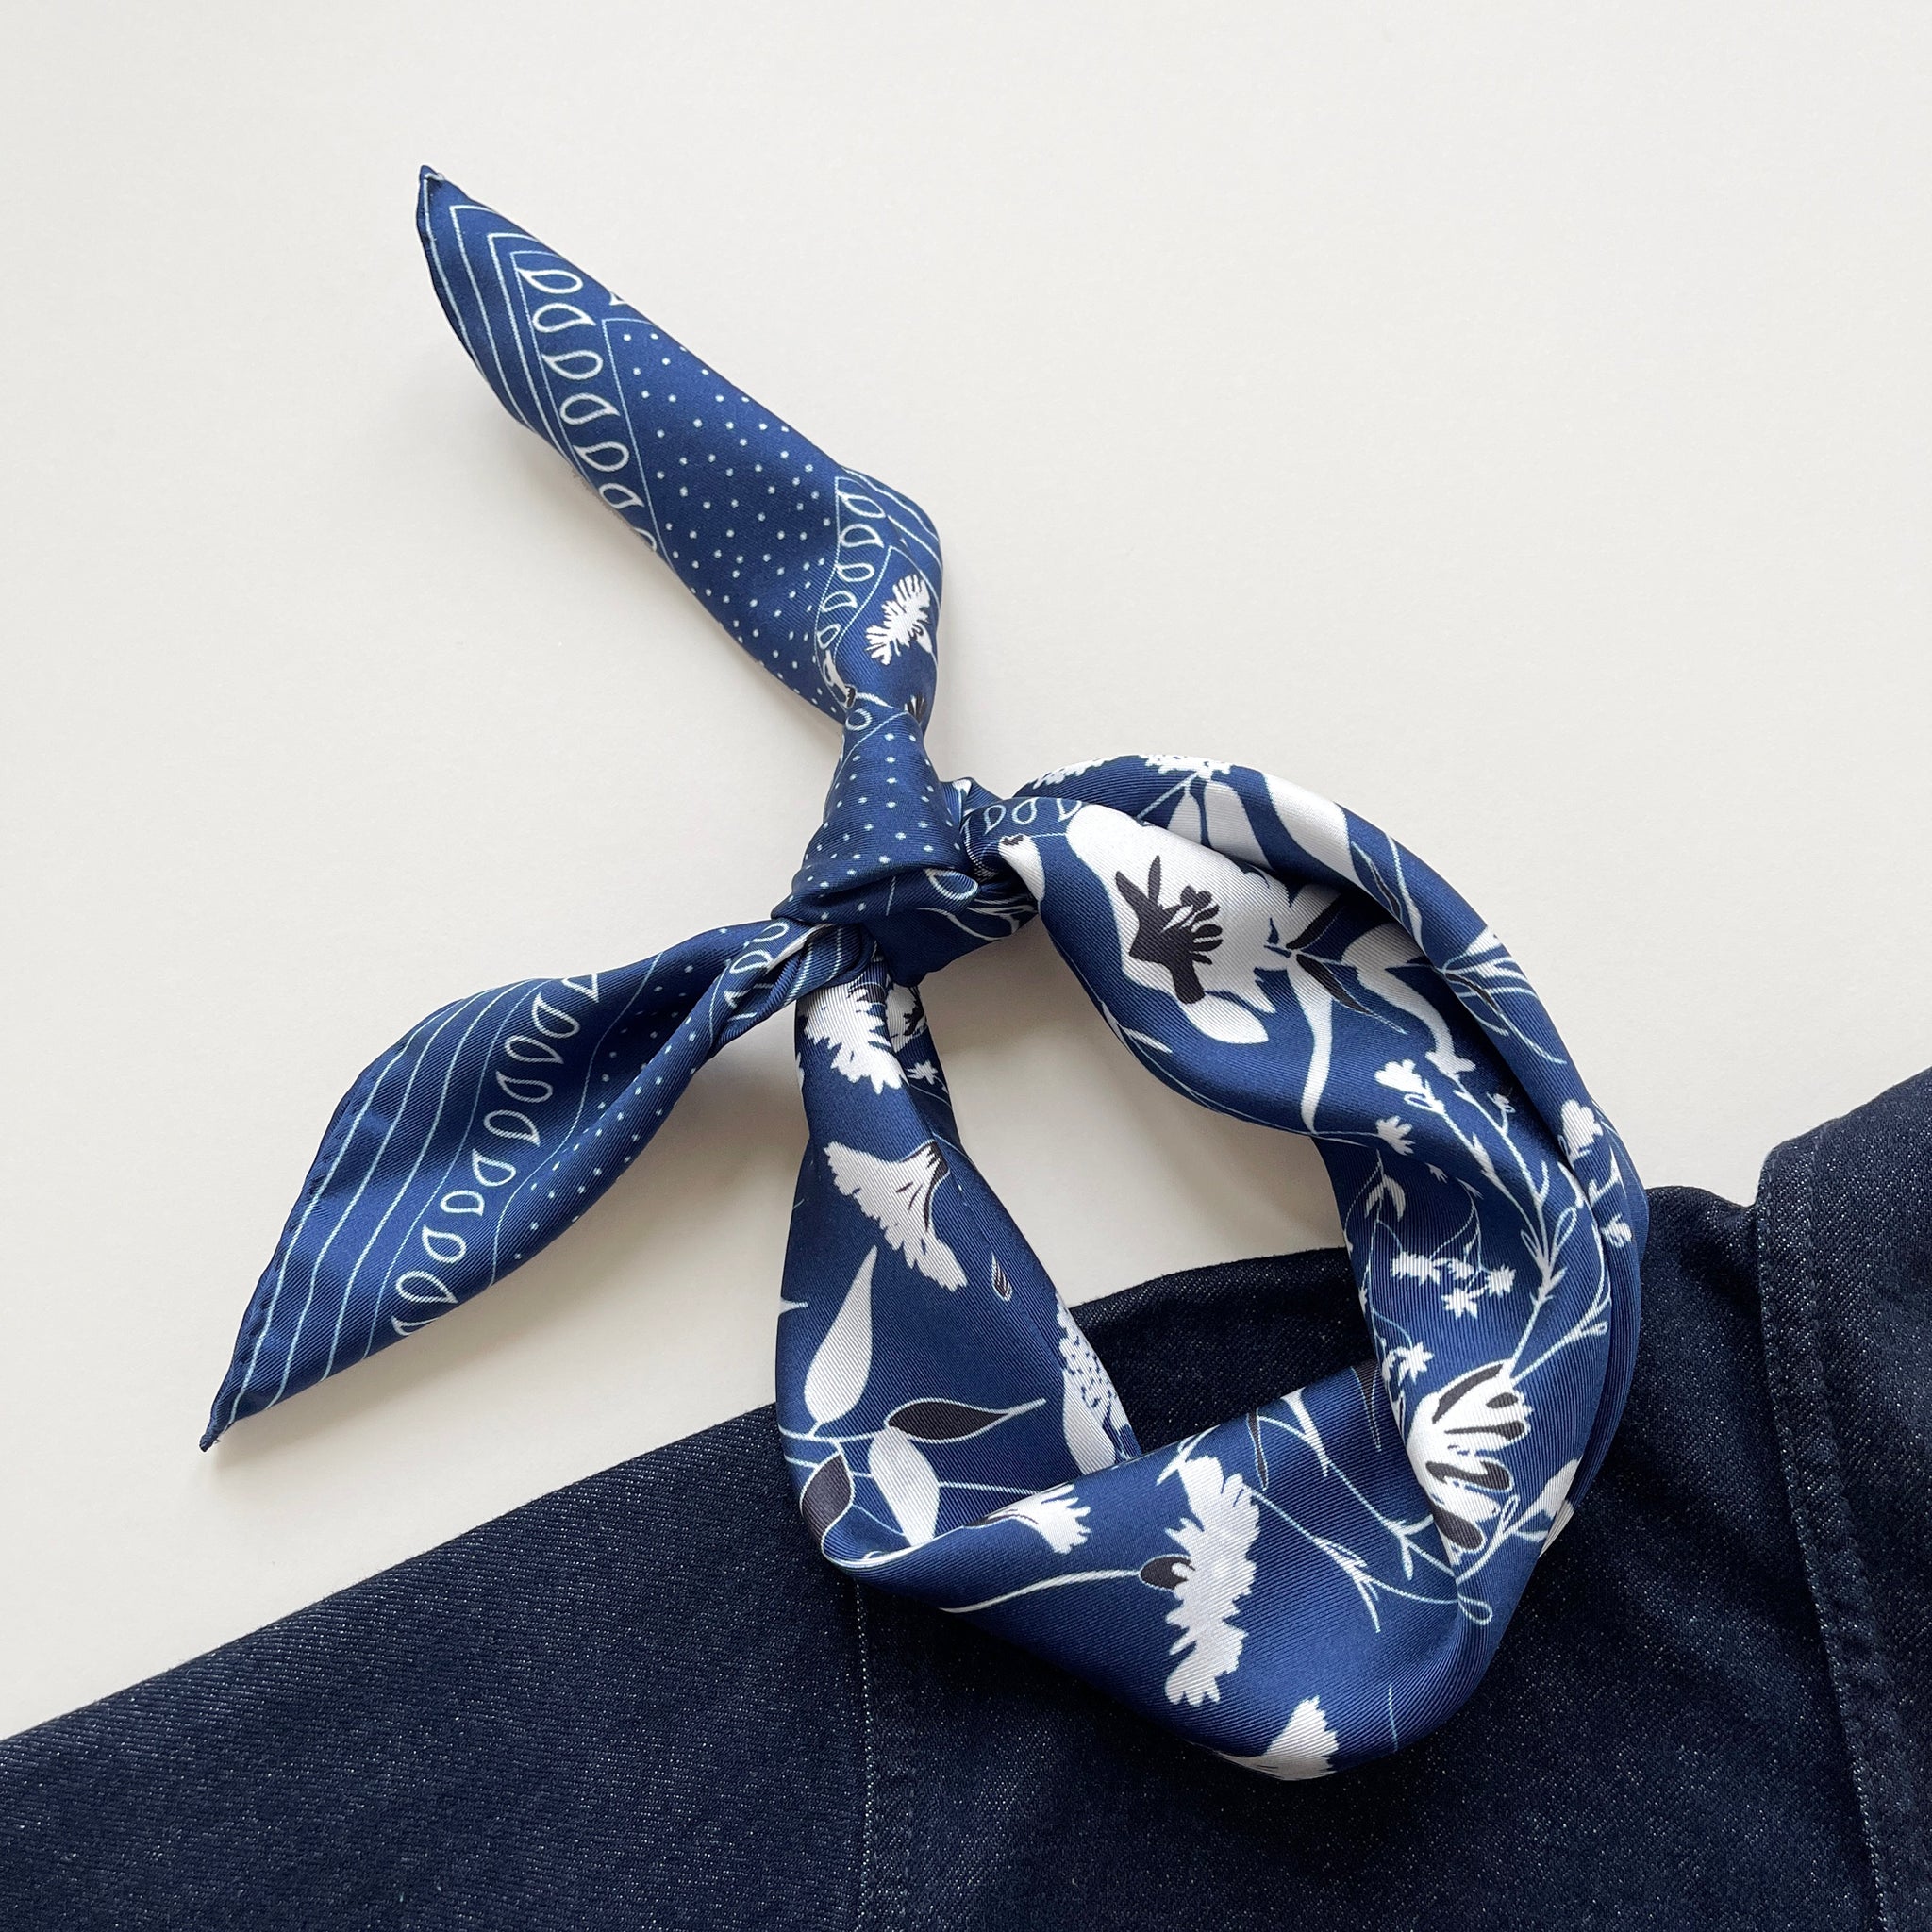 a rich blue silk scarf featuring botanic leafy print and hand-rolled hems knotted as a headband, paired with a dark blue denim top